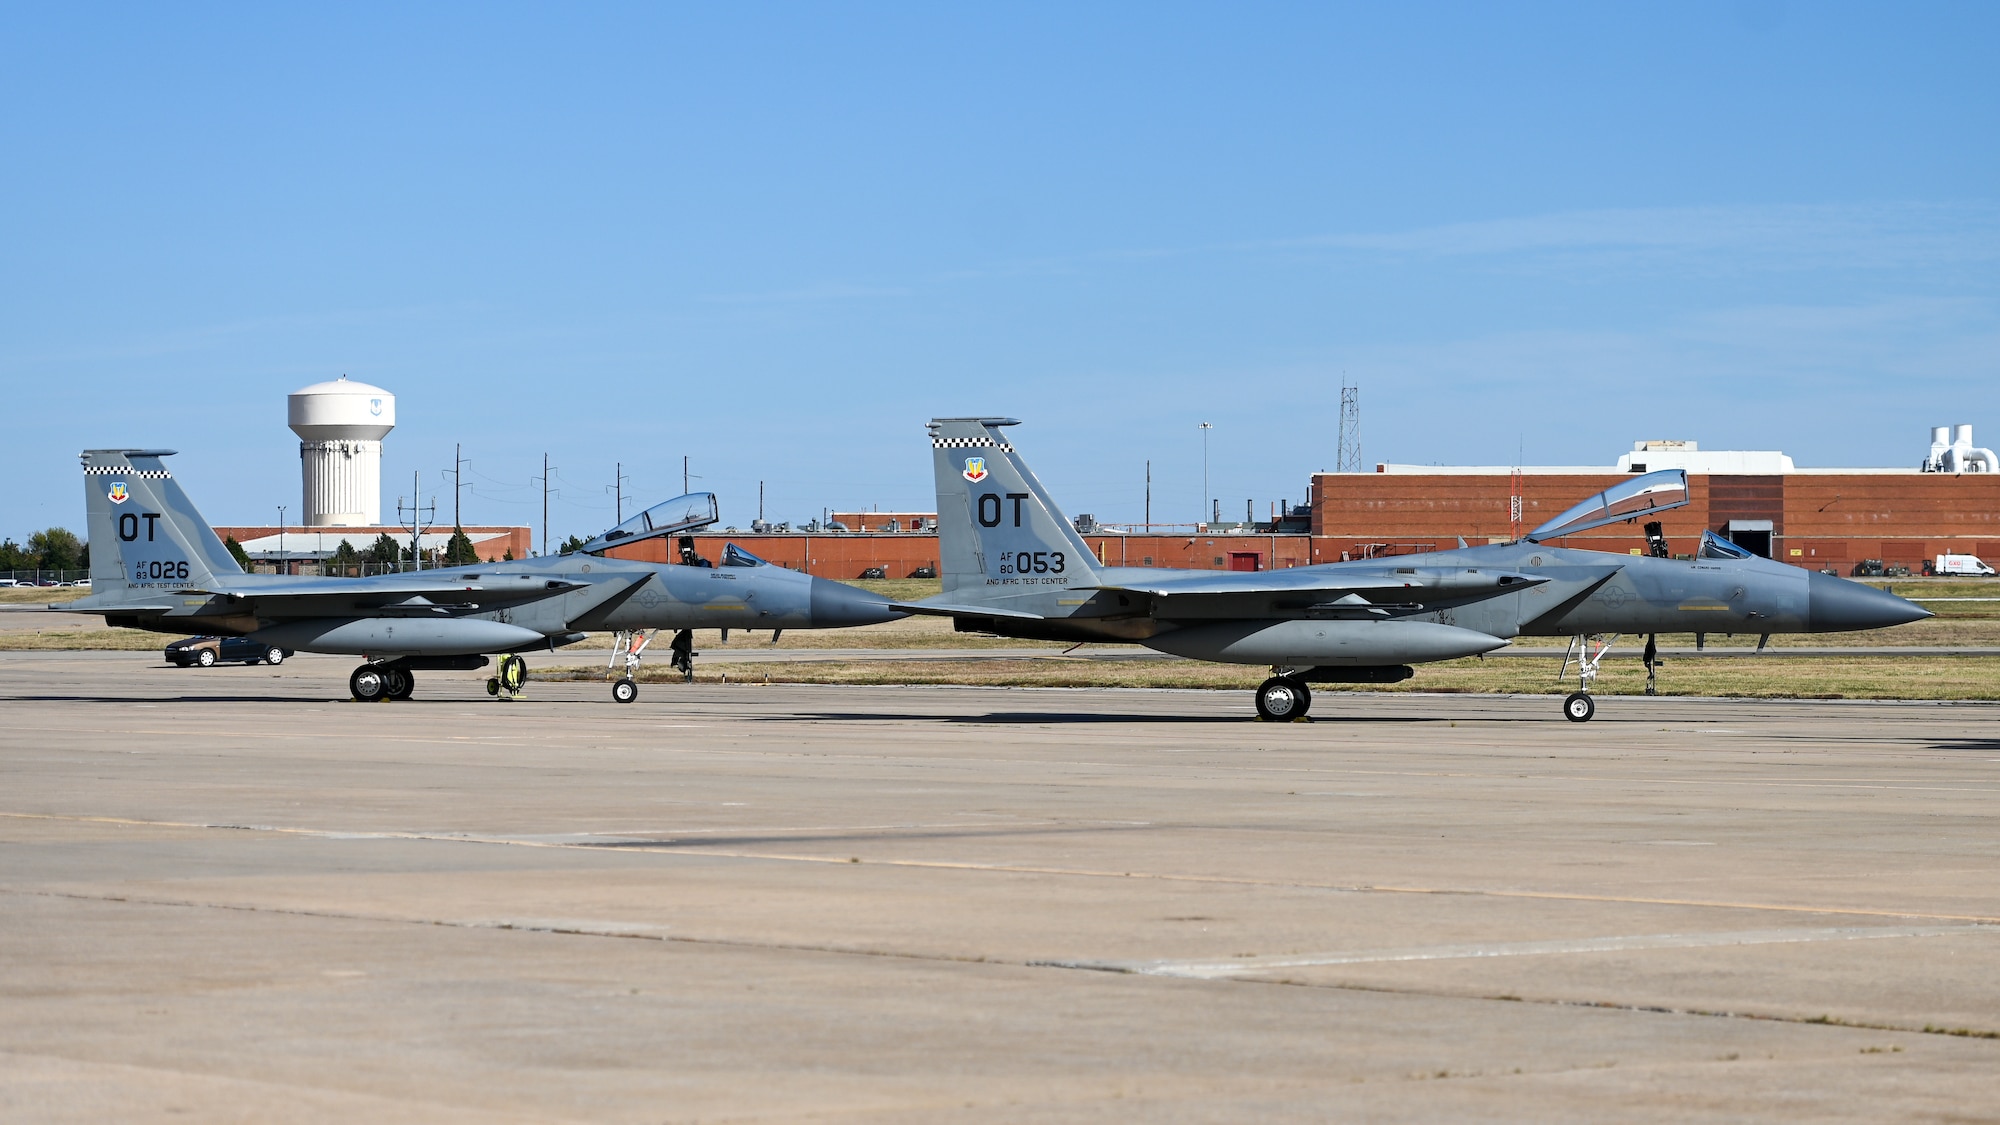 Two F-15 aircraft parked on ramp